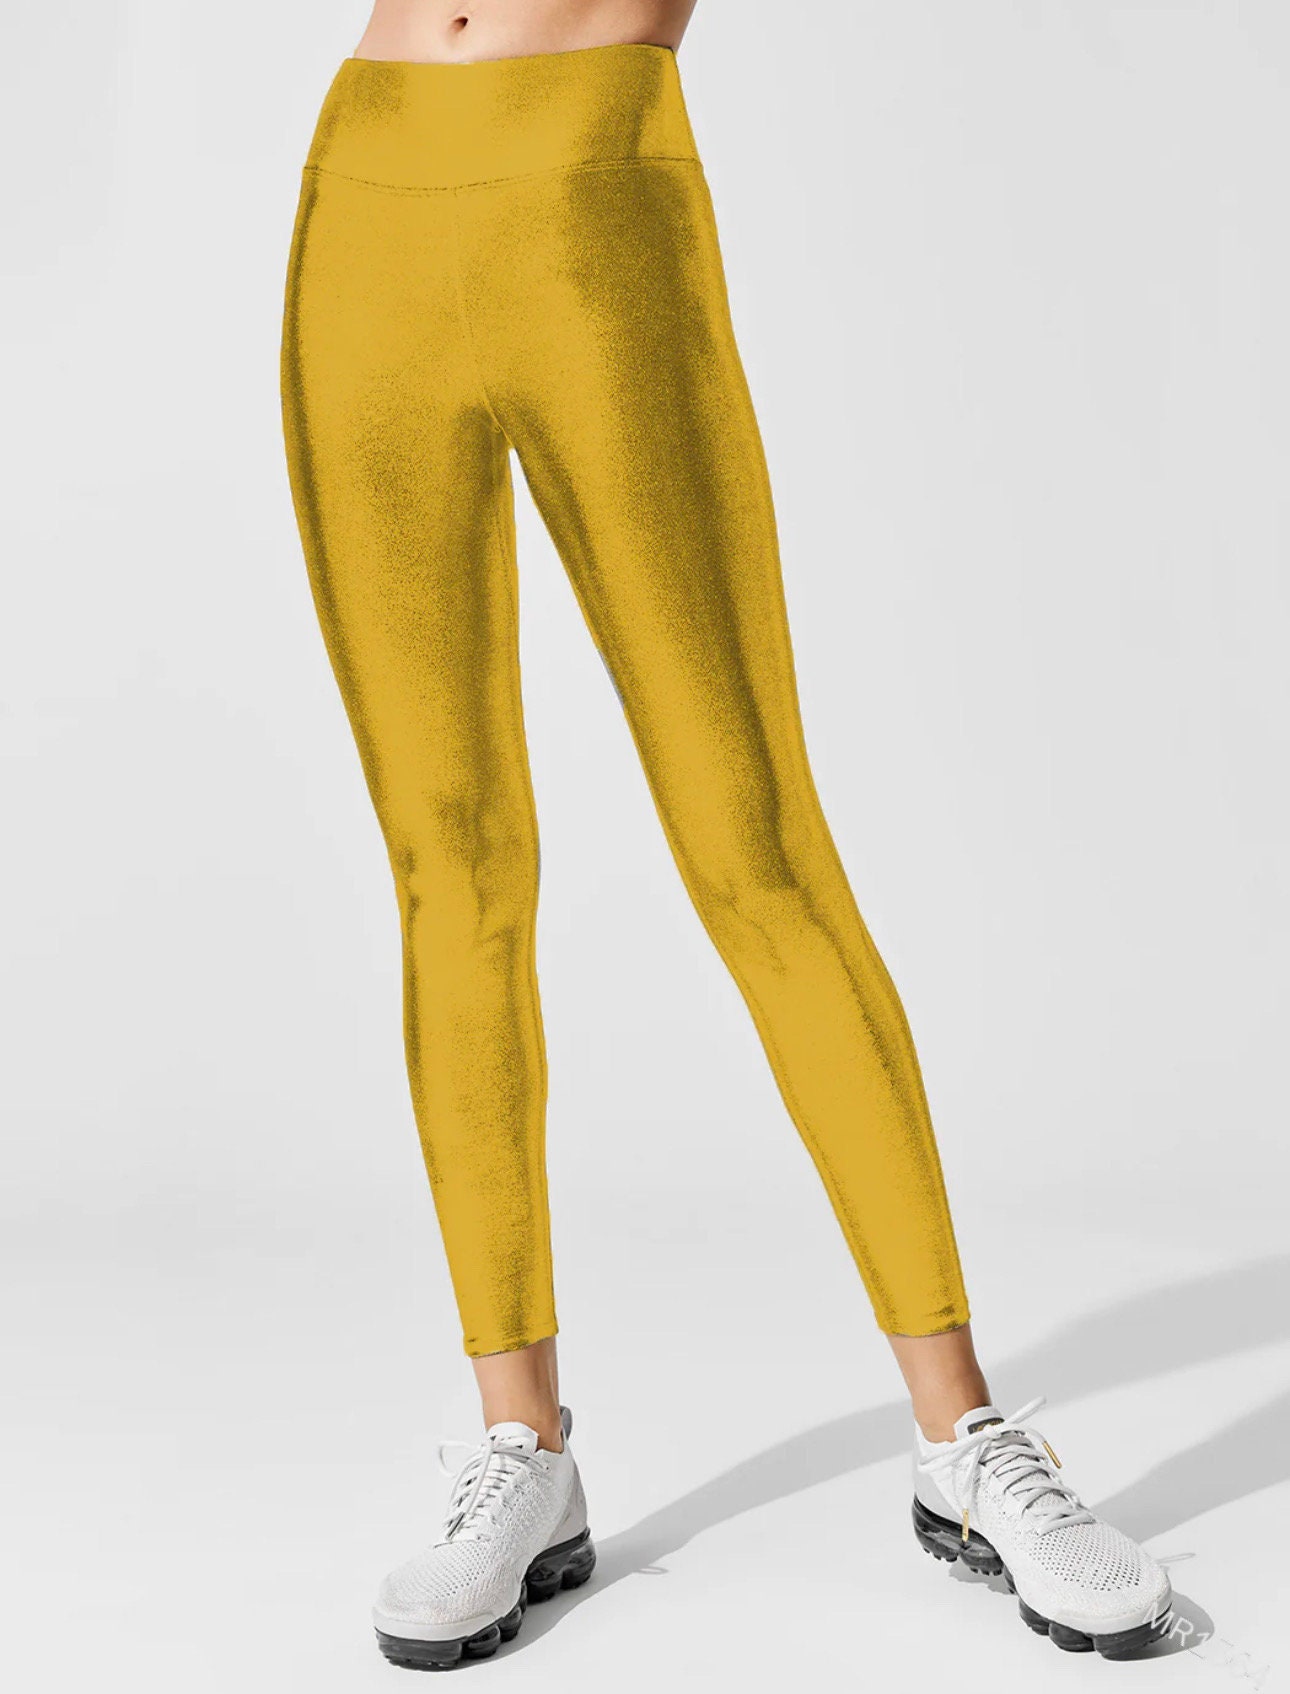 Gold Metallic Foil Leggings Golden Wet Look Tights Women Workout Clothing Gym  Shiny Bling Bling Yoga Pants Gym Shaping Push up Bottoms Plus -  Canada